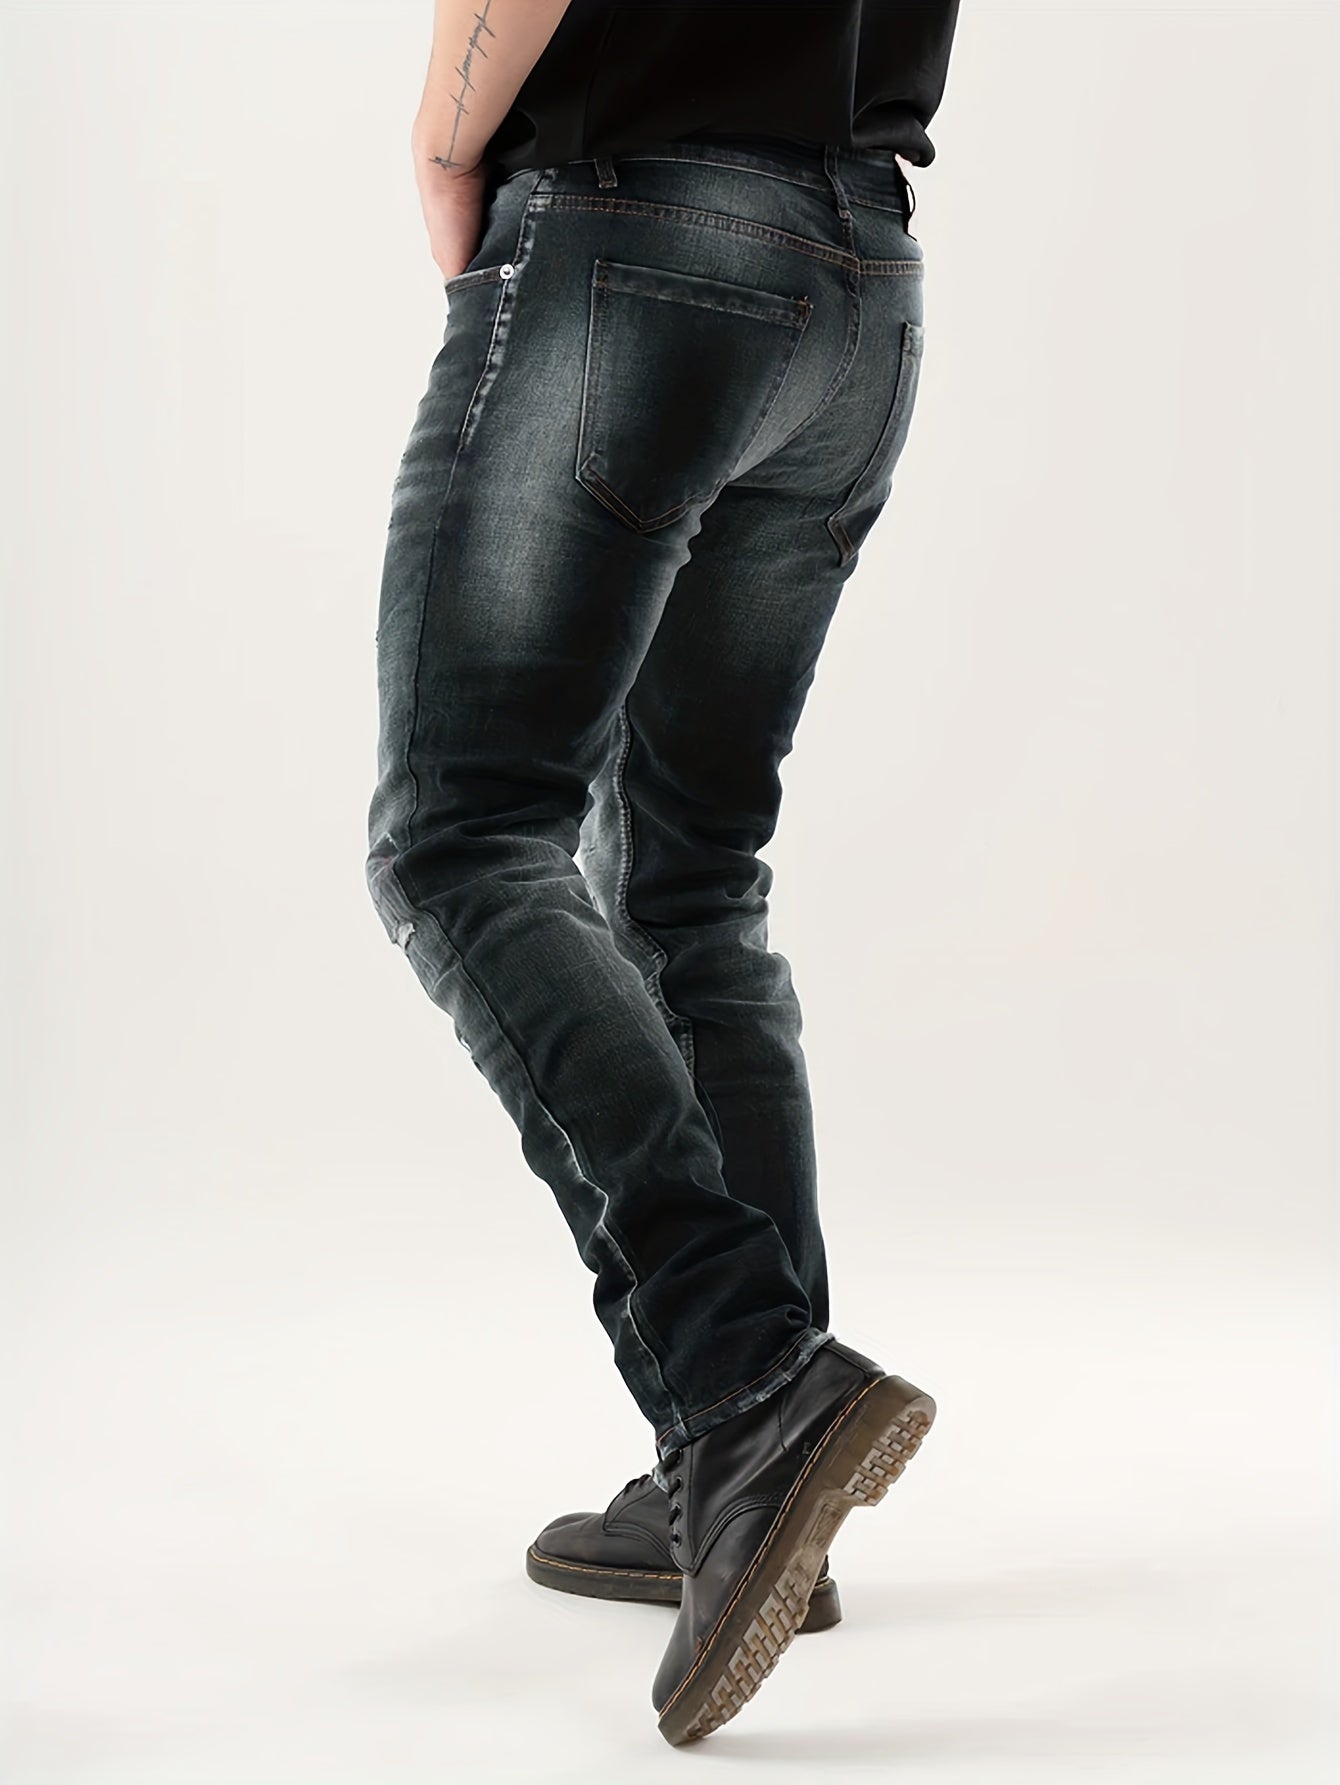 "Distressed Skinny Jeans for Men - Fashionable Street Style with Medium Stretch"